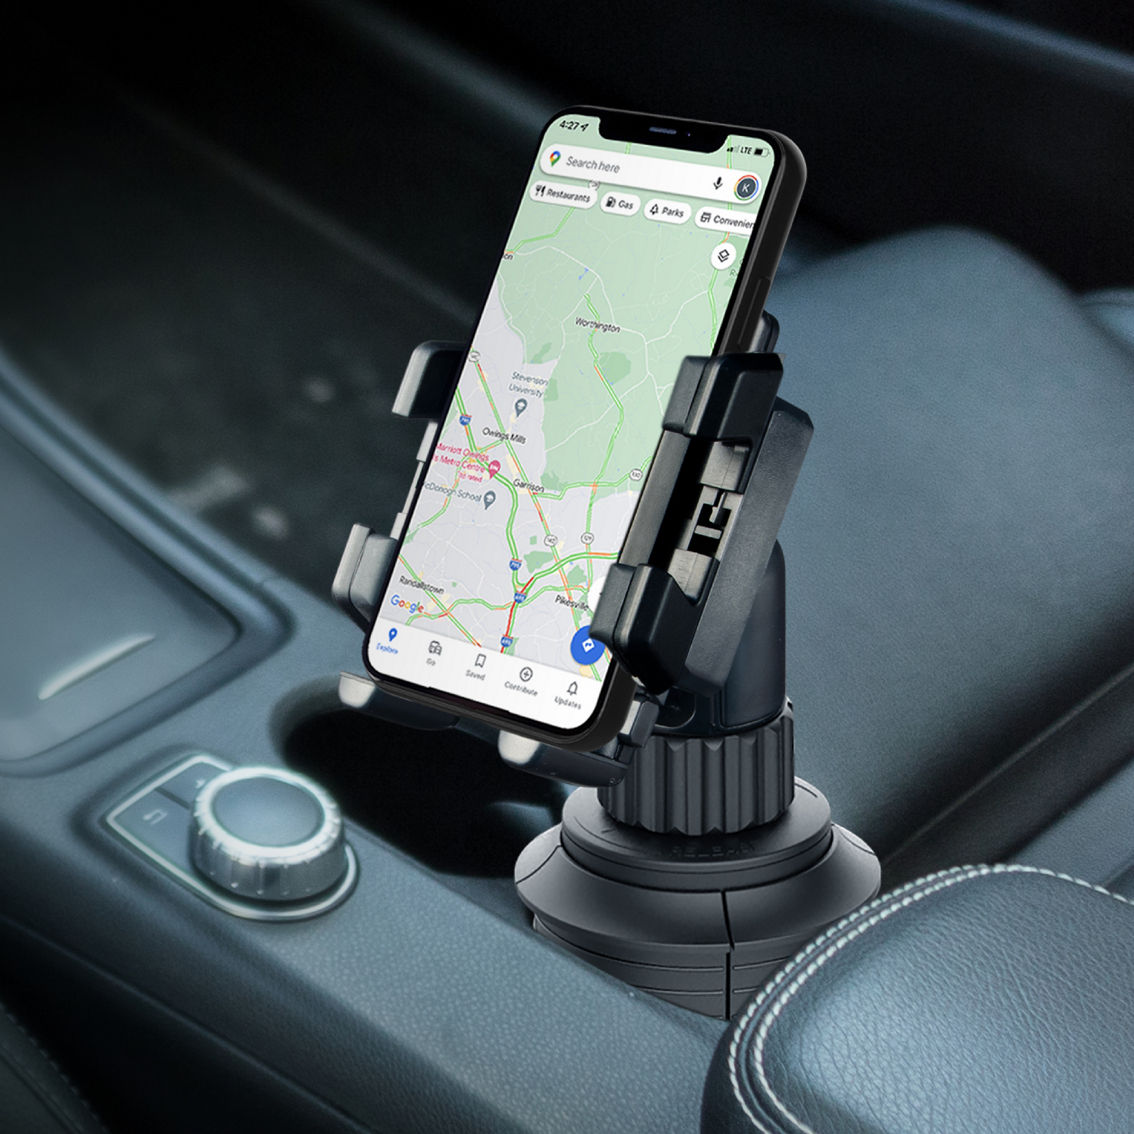 ToughTested Cup Holder Phone Mount - Image 3 of 3